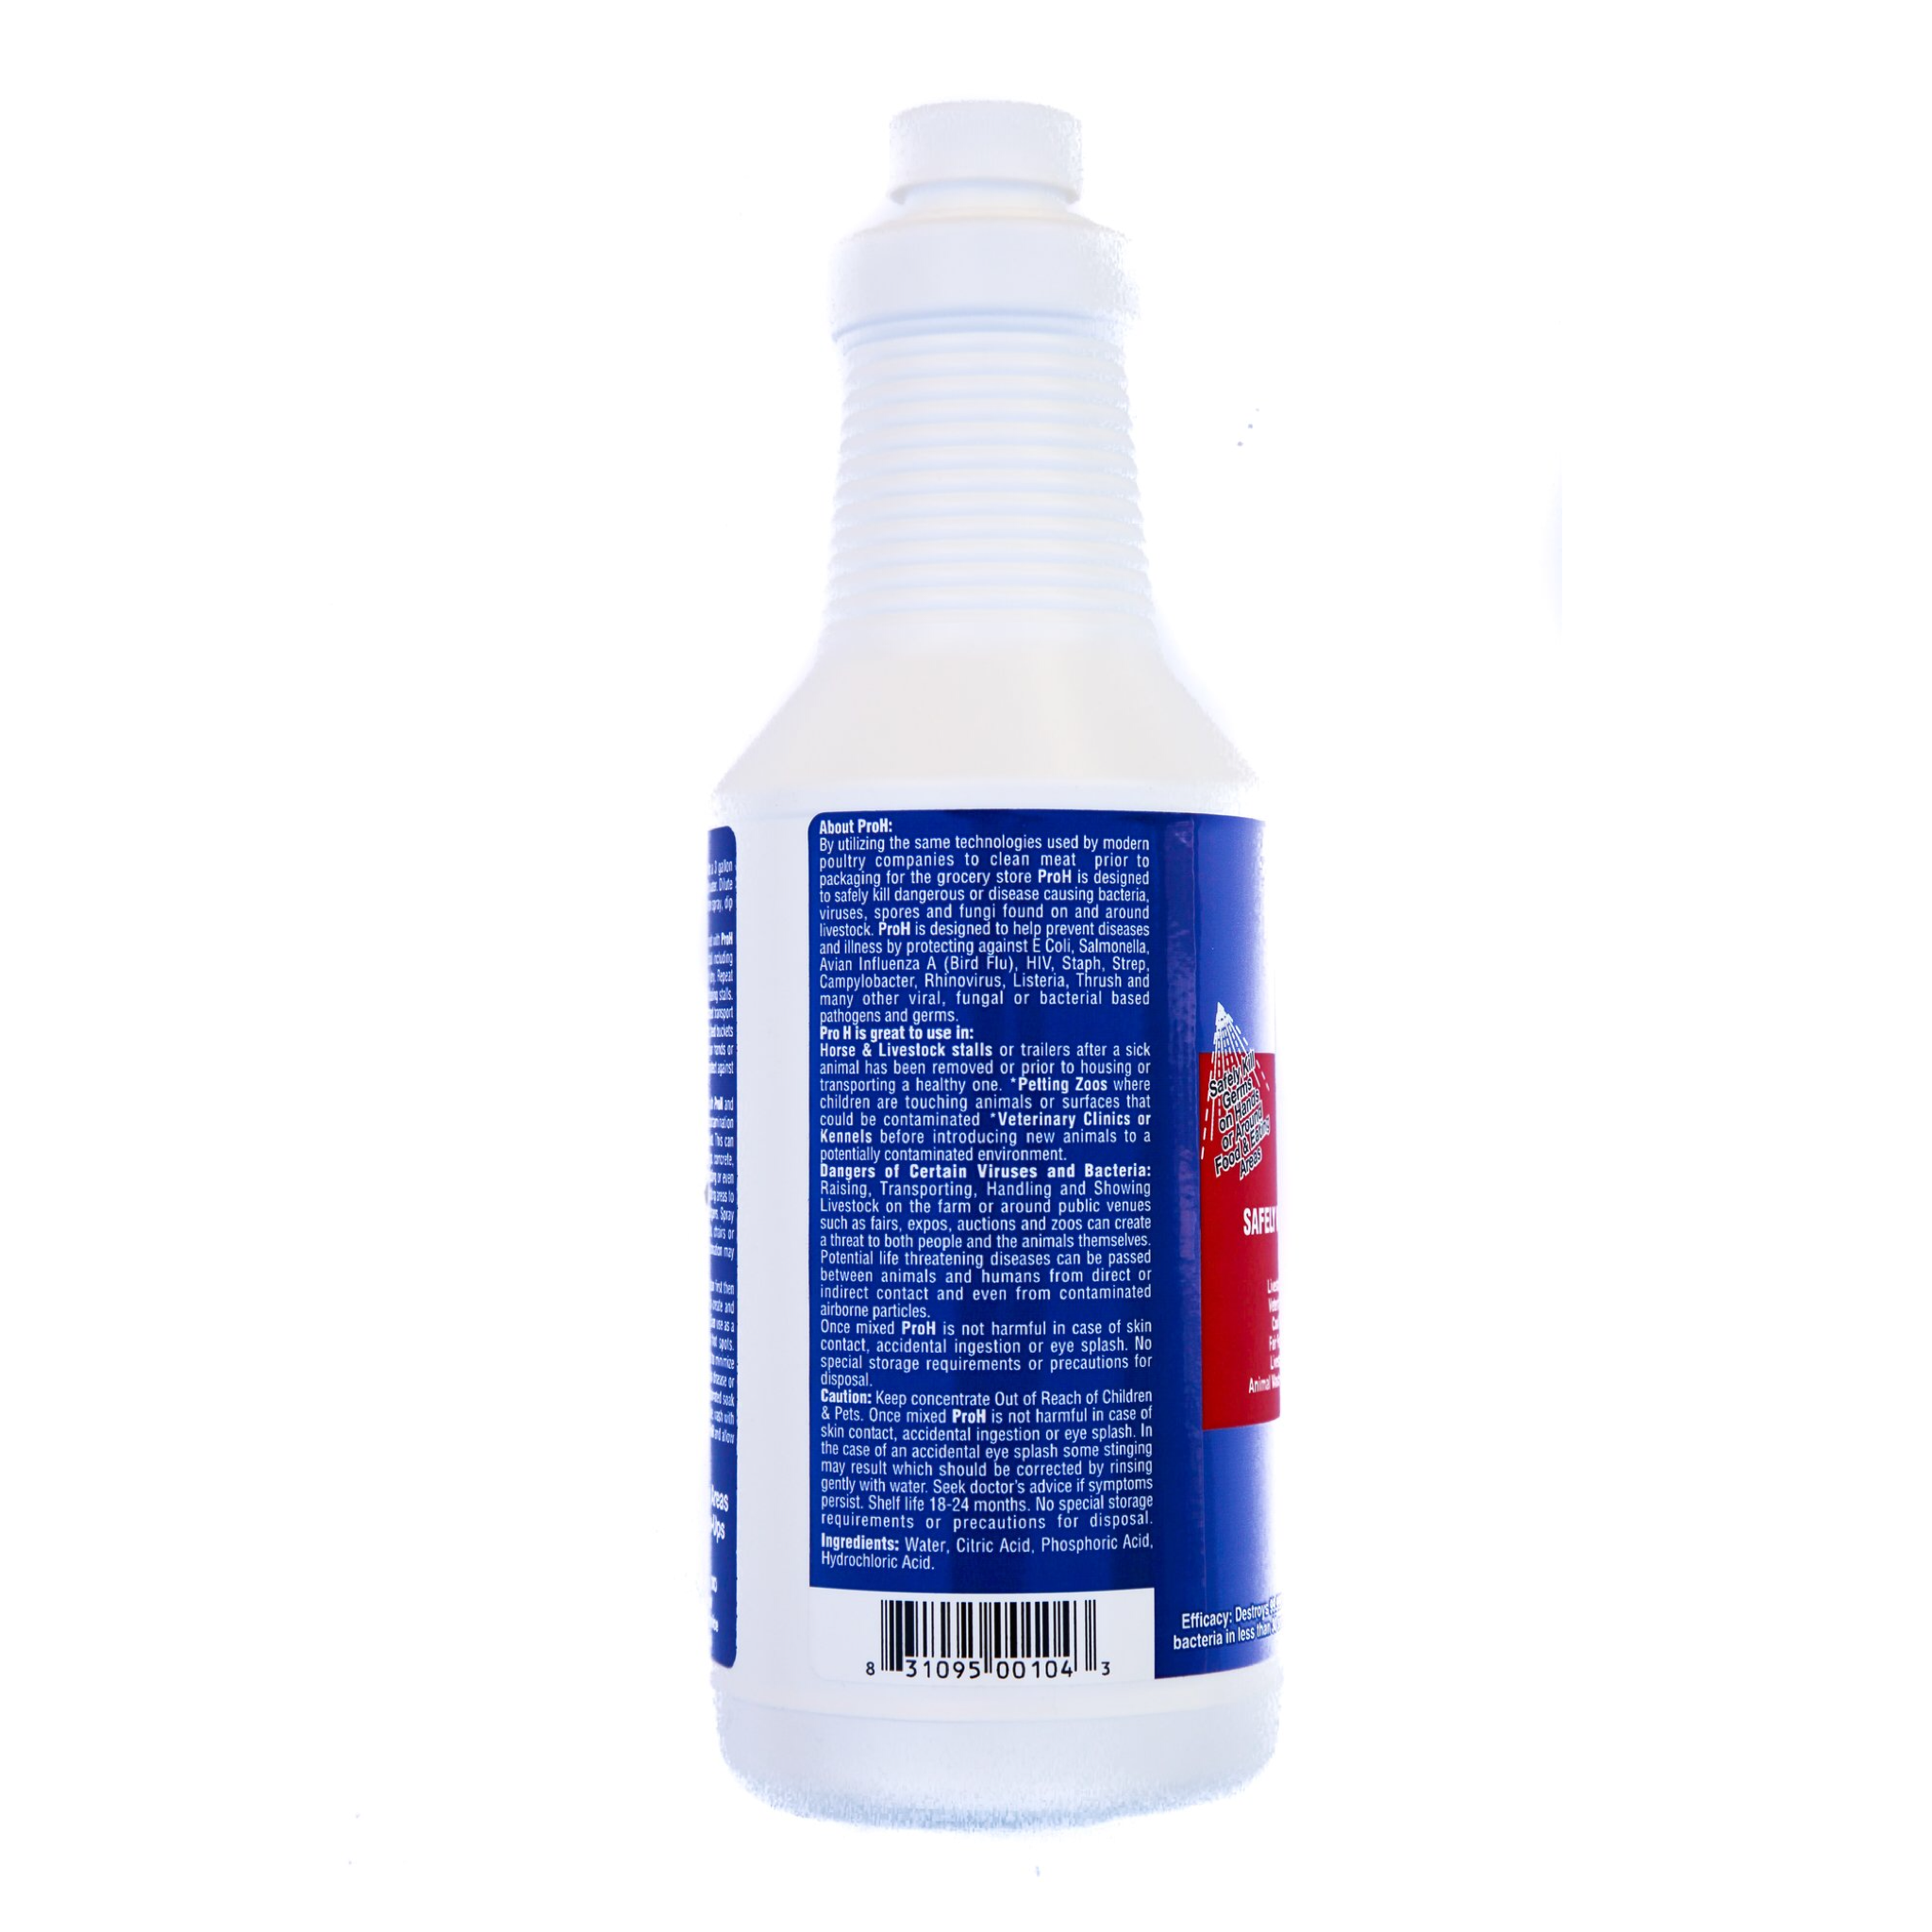 ProH Concentrate - Disinfect Large Areas Such as Cooler Rooms, Barns, Stalls, Trailers, Etc. Helps Prevent Viruses, Bacteria and Fungi 32. oz Concentrate Makes 2.5 Gallons